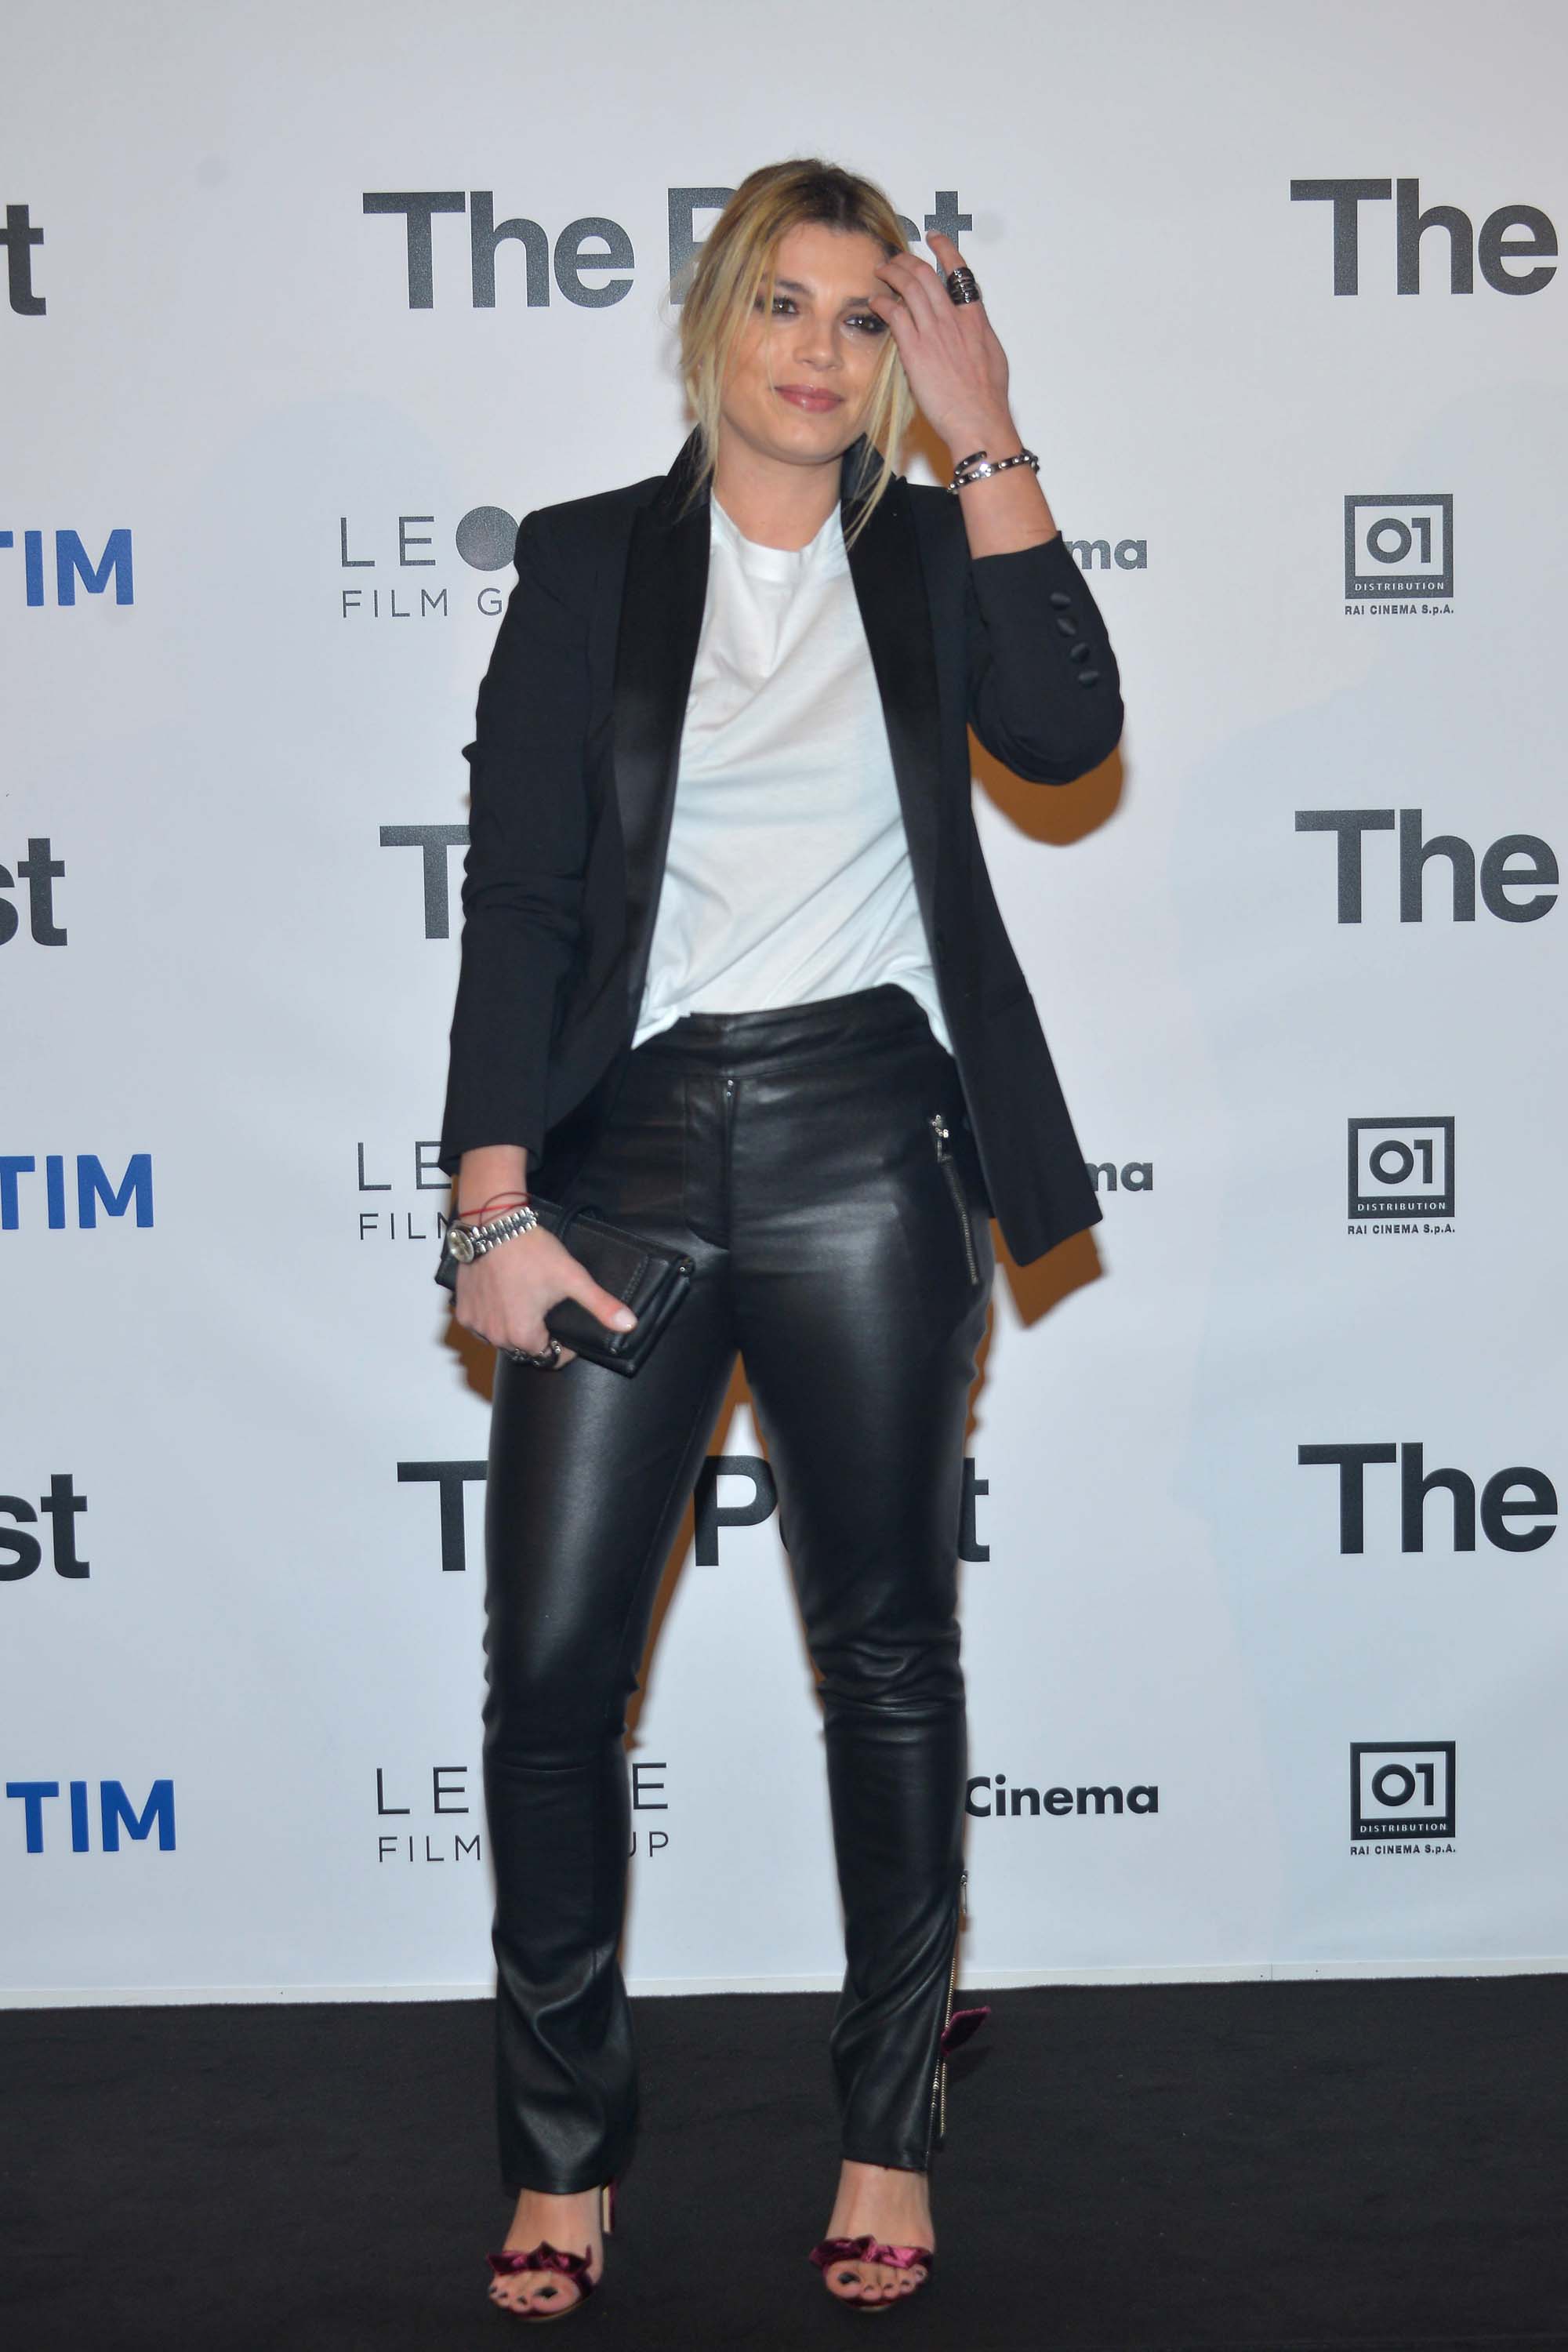 Emma Marrone attends The Post Red Carpet